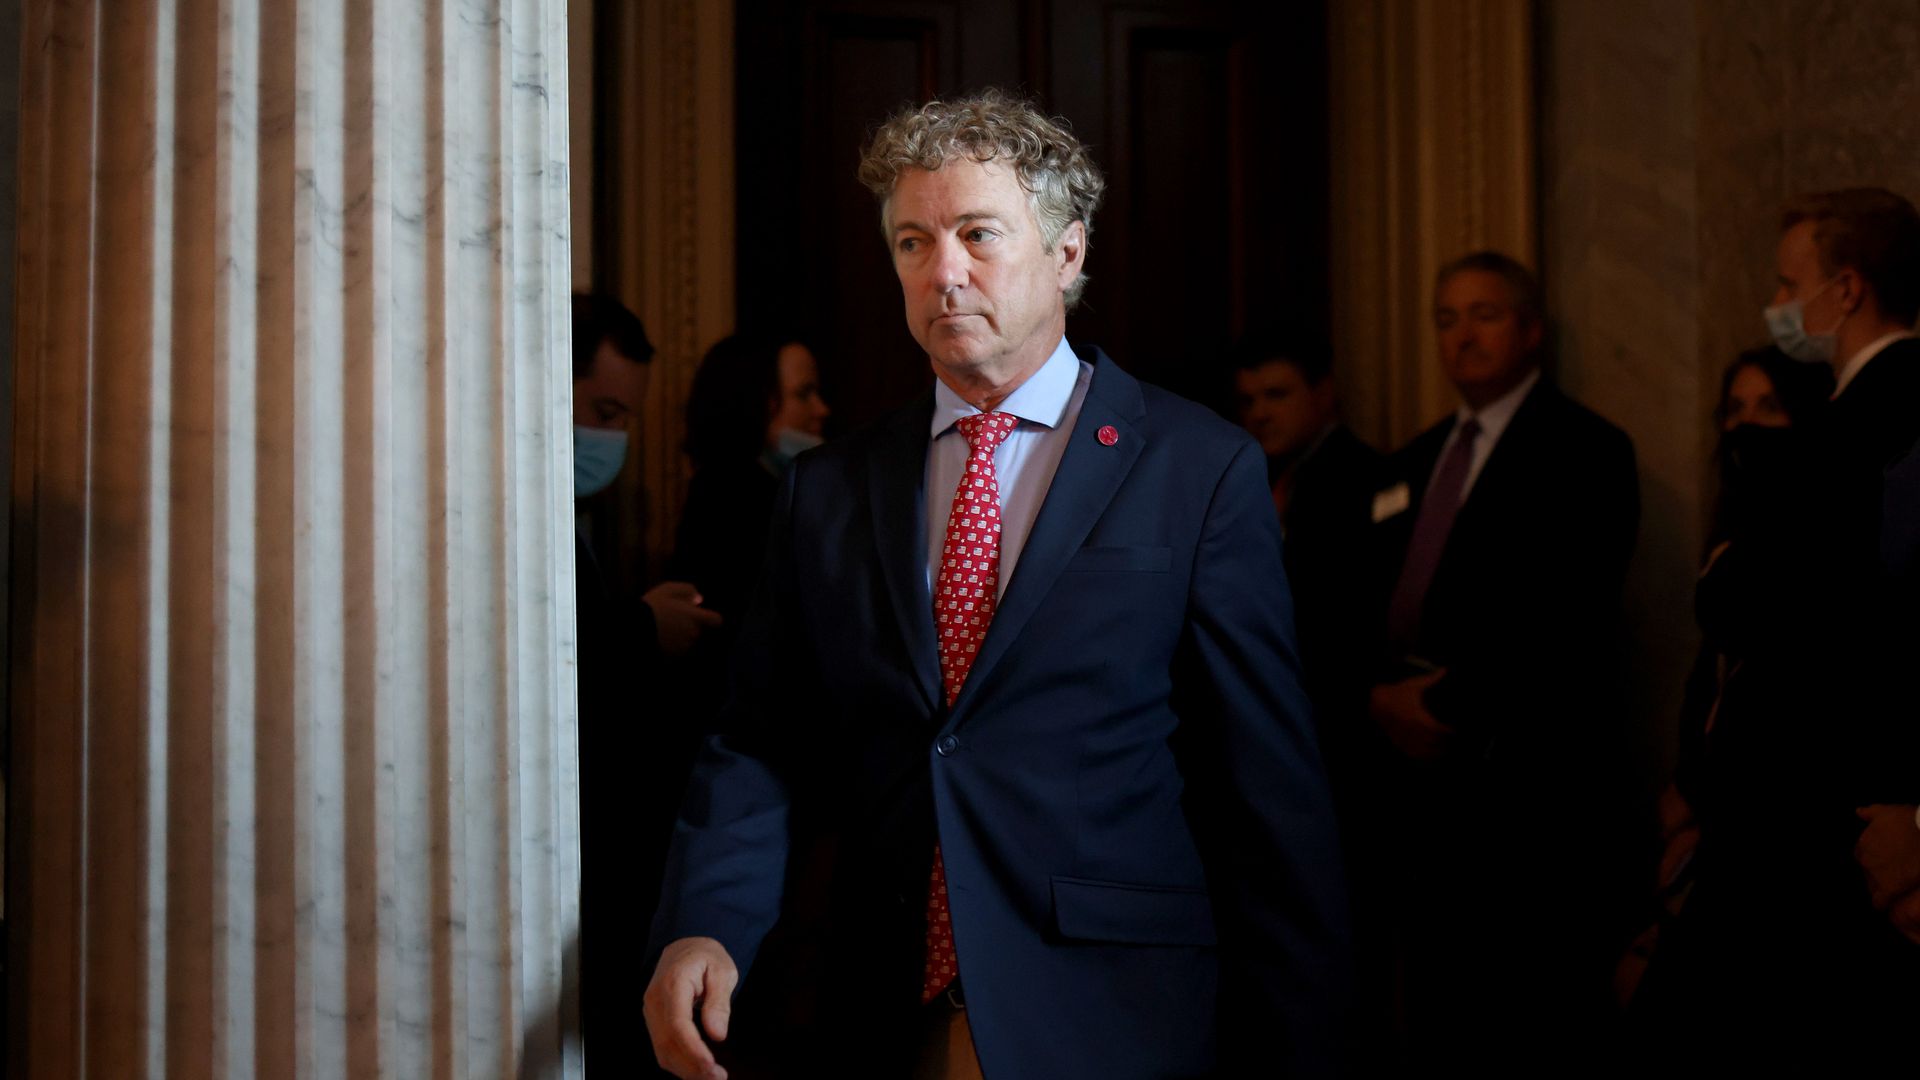 Sen. Rand Paul (R-KY) departs from a luncheon with Senate Republicans in the U.S. Capitol building on August 05, 2021